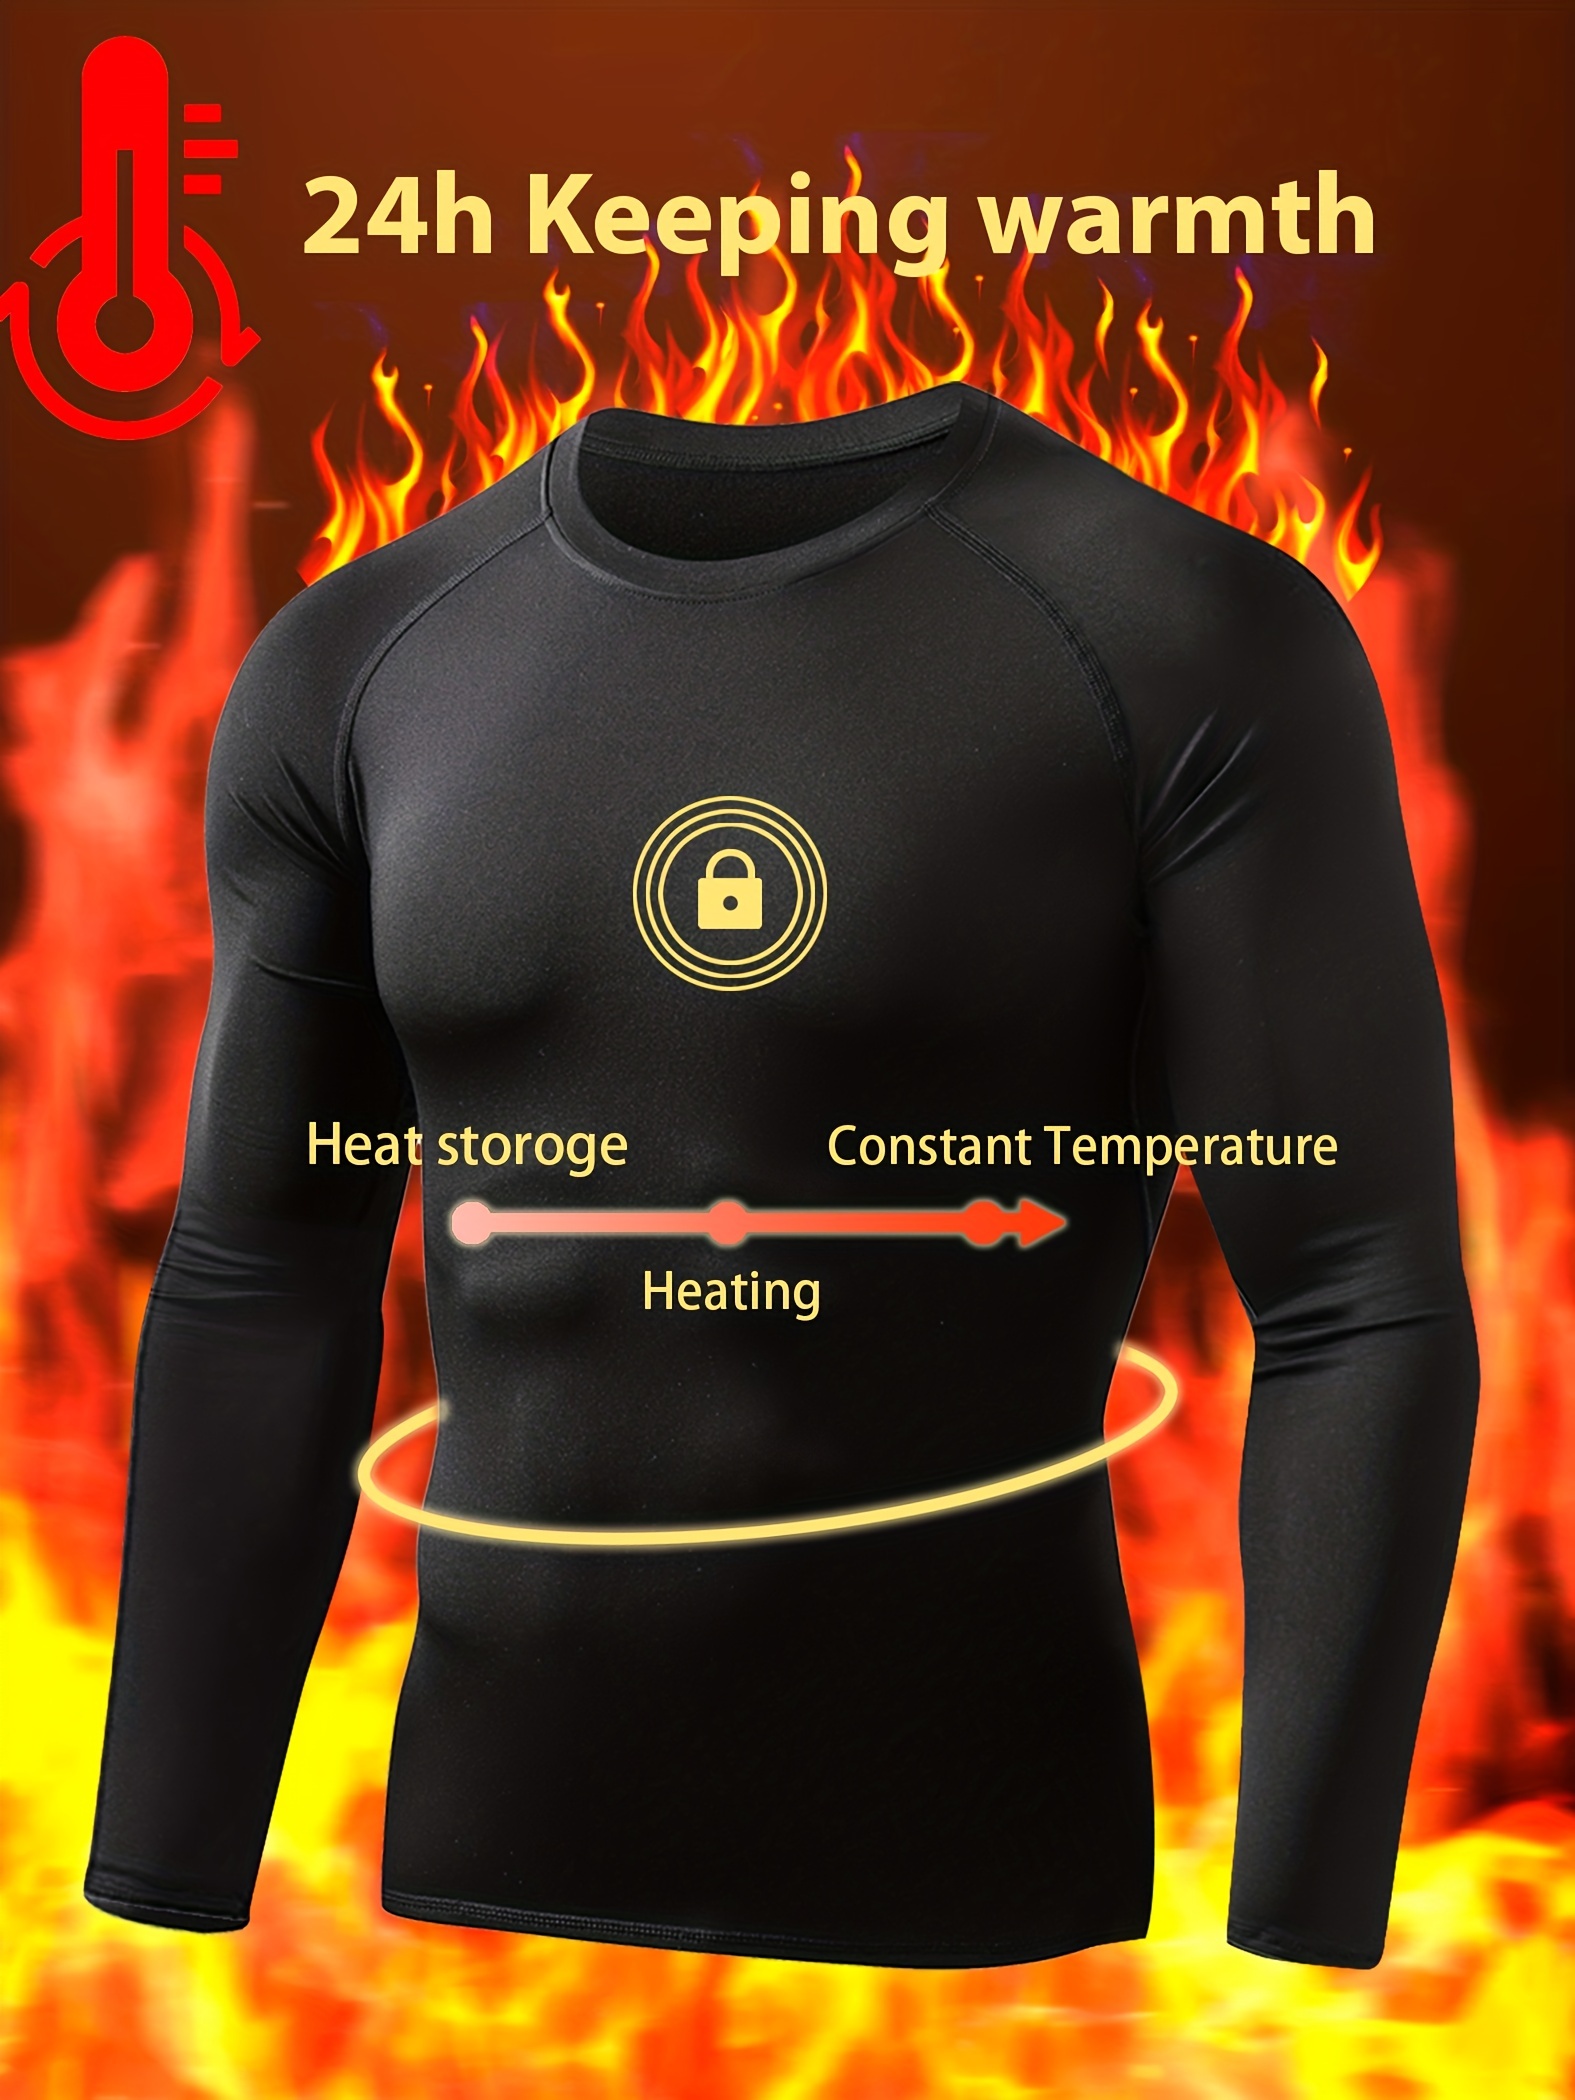 Thermal Shirts for Men Long Sleeve Shirts for Men Thermal